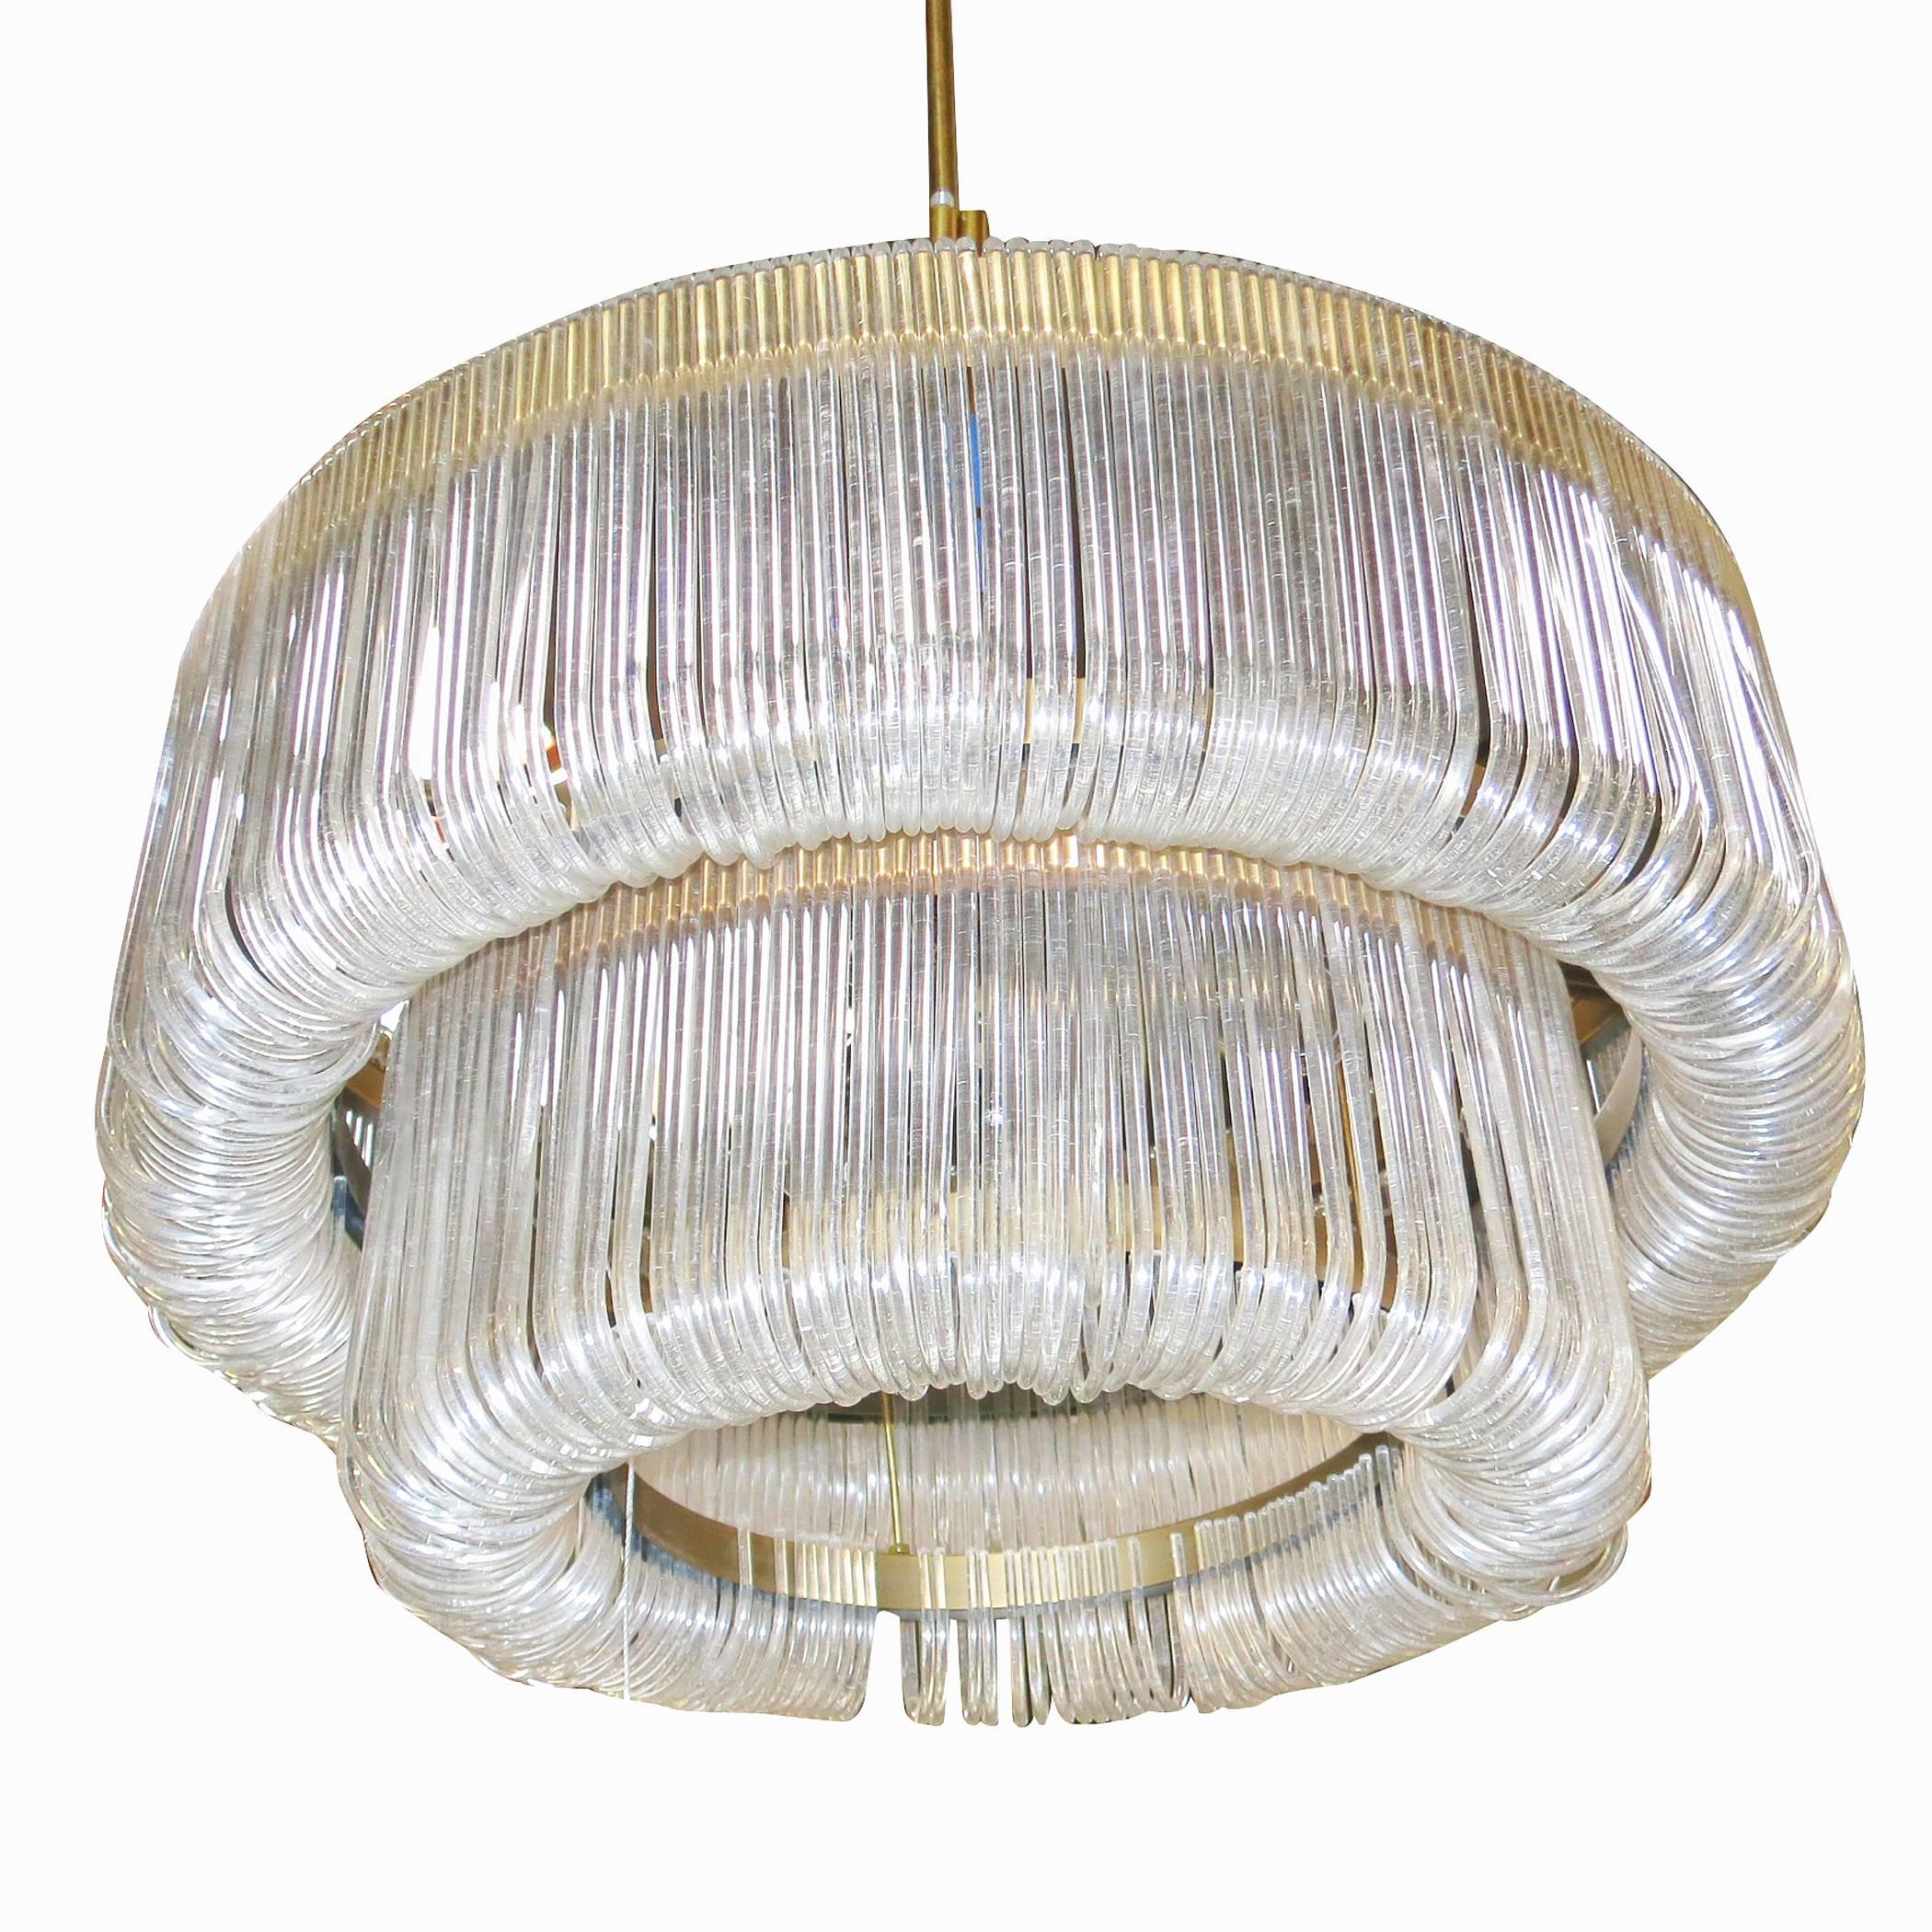 Grand Mid-Century Lucite chandelier. Comprised of hundreds shaped Lucite pieces hanging for a two tier brass frame. This unique chandelier gives an almost prism quality when light up and has a Classic hallmarks of traditional beauty with a very